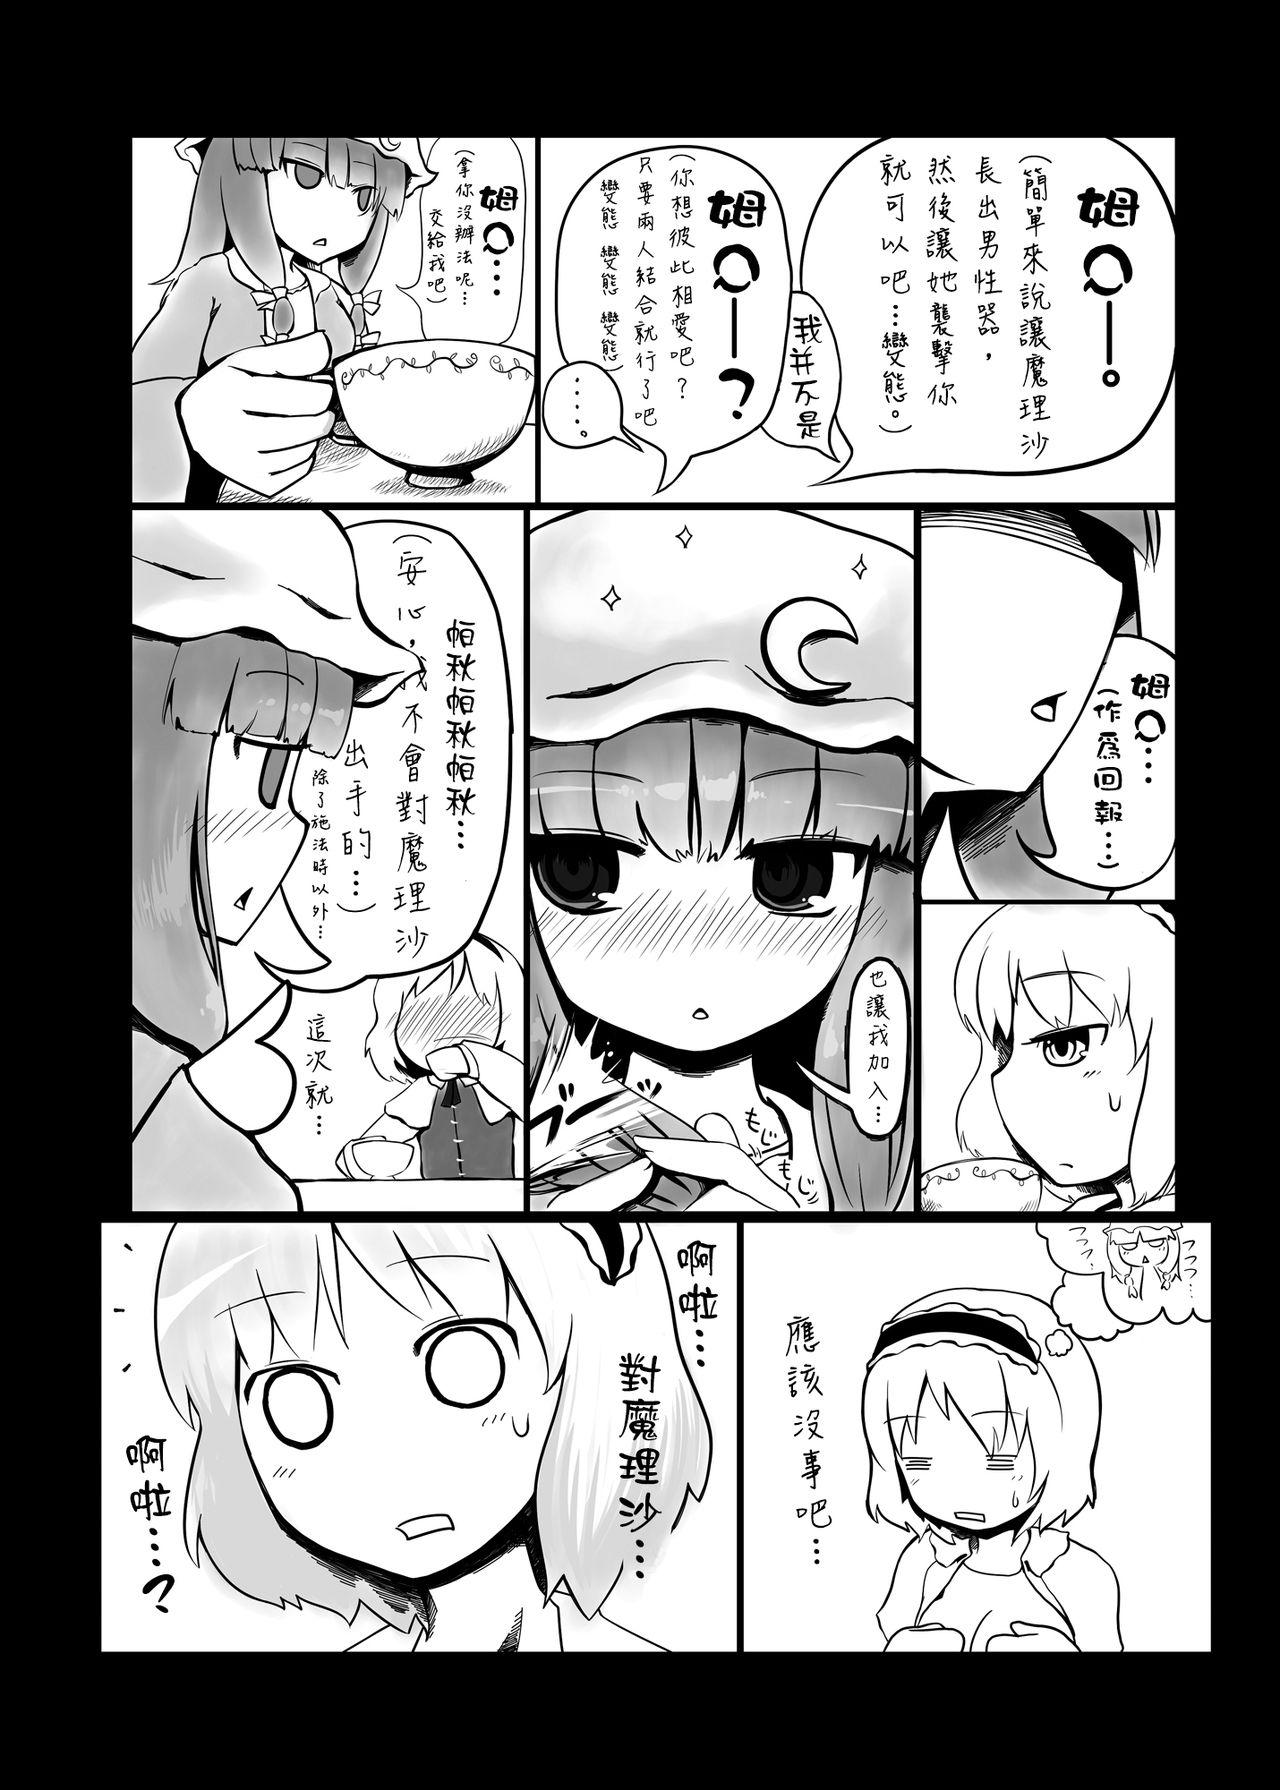 All Natural Touhou Ero Atsume. - Touhou project Exhib - Page 10